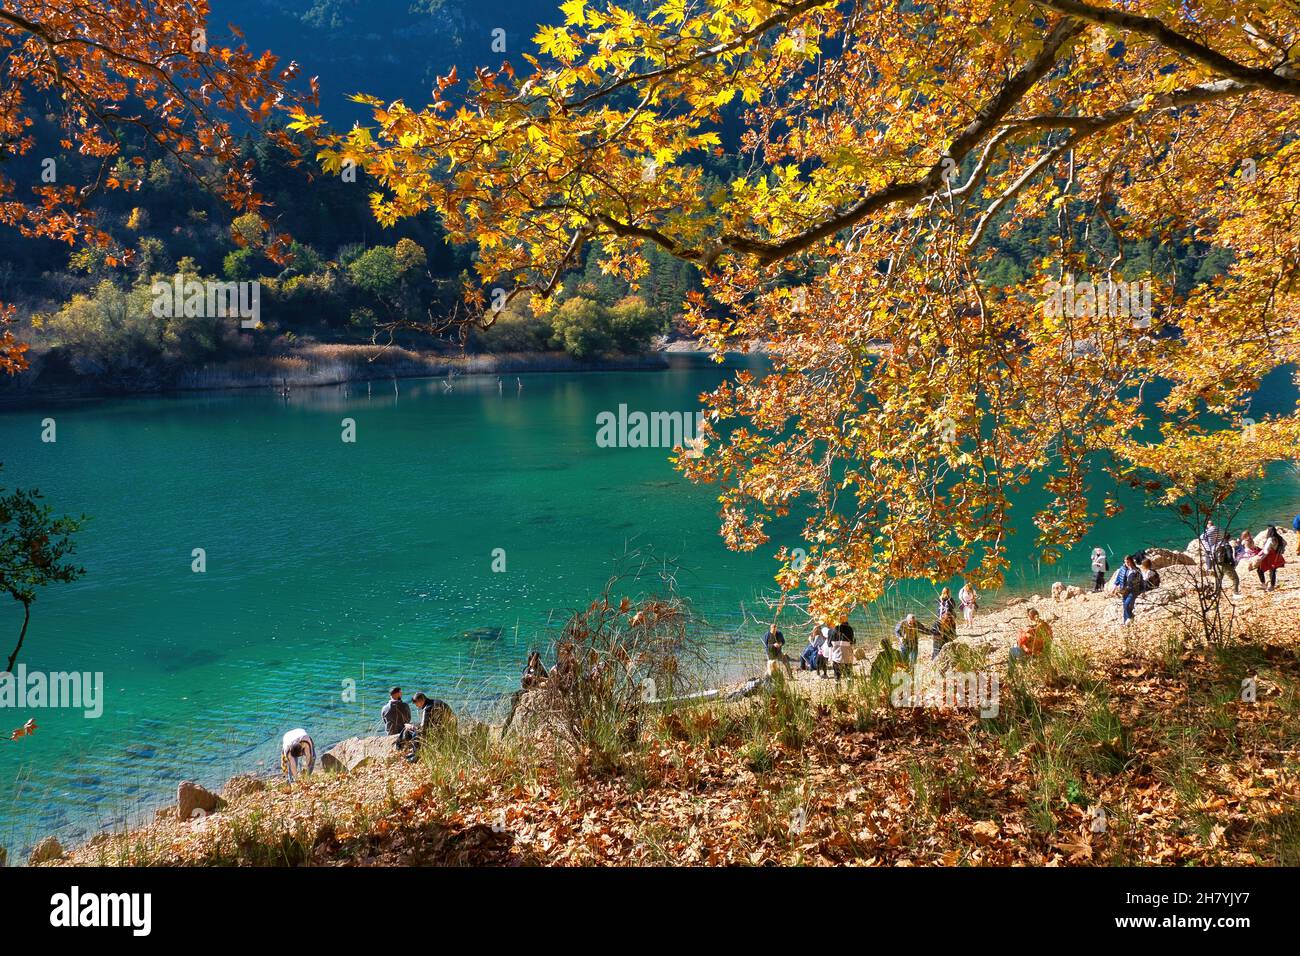 Beautiful lake in autumn with colorful tree leaves Stock Photo